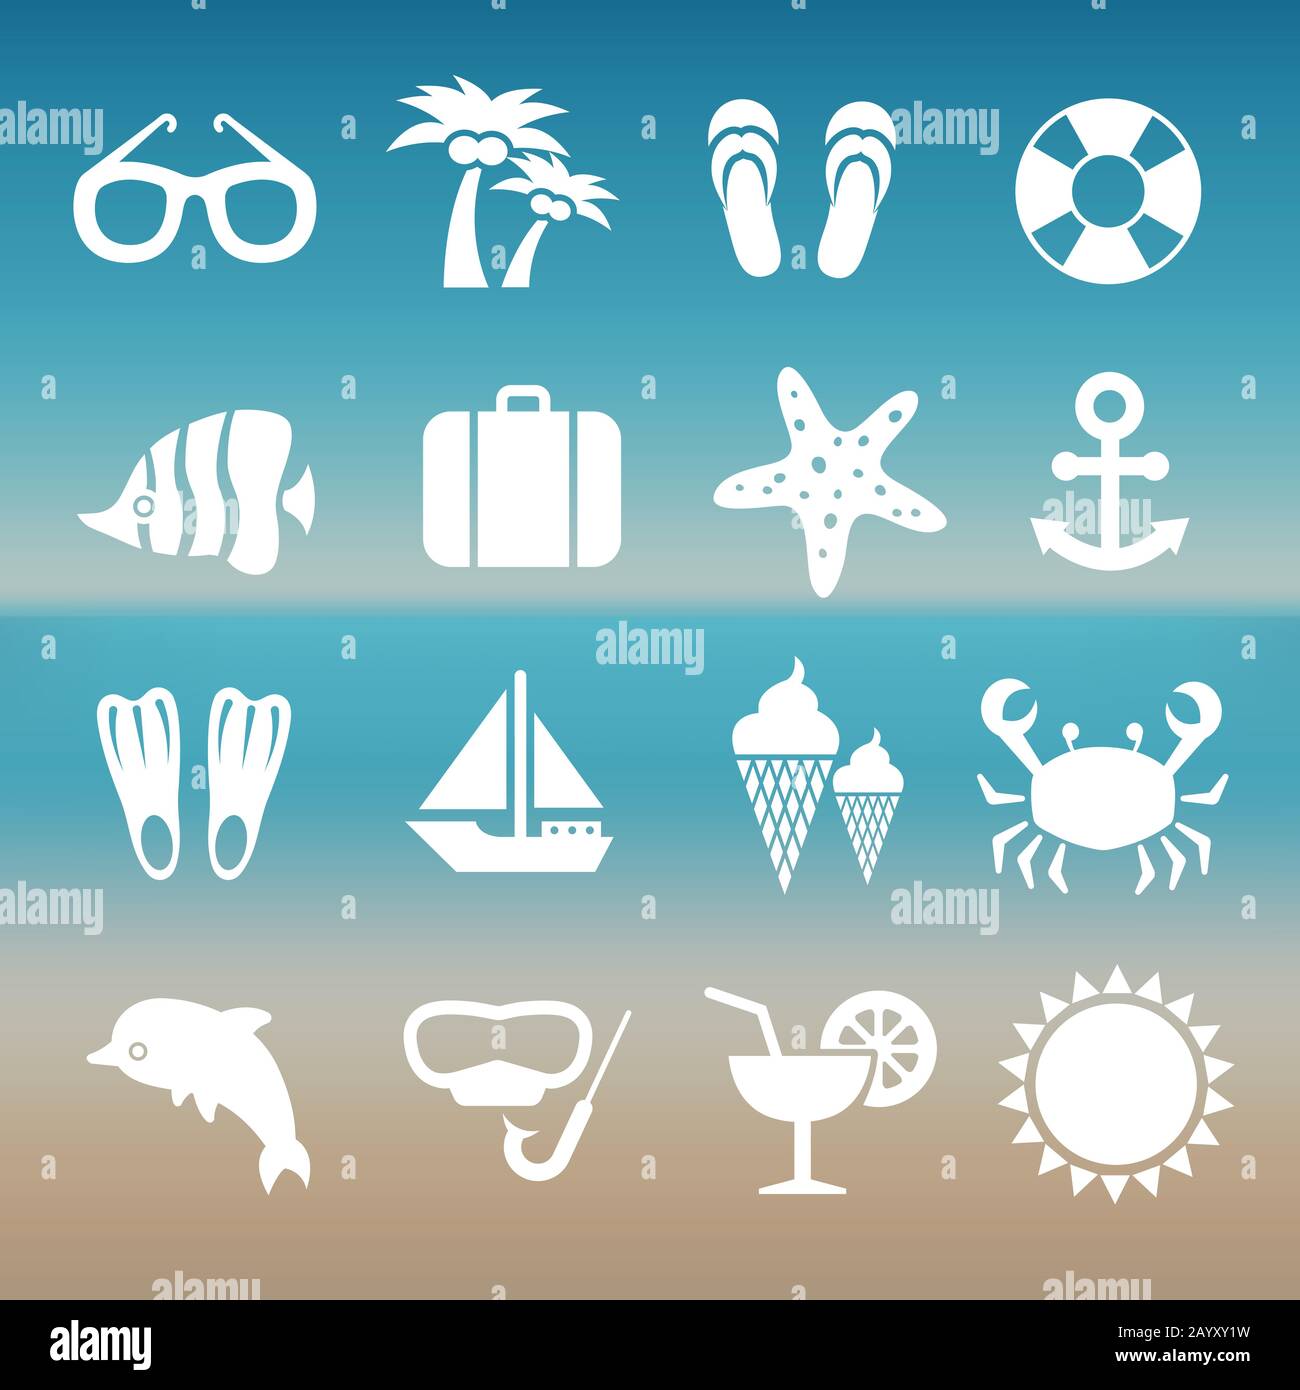 Summer rest traveling tourism vacation time icons. Set of summer travel icons, illustration of white silhouette travel icons Stock Vector